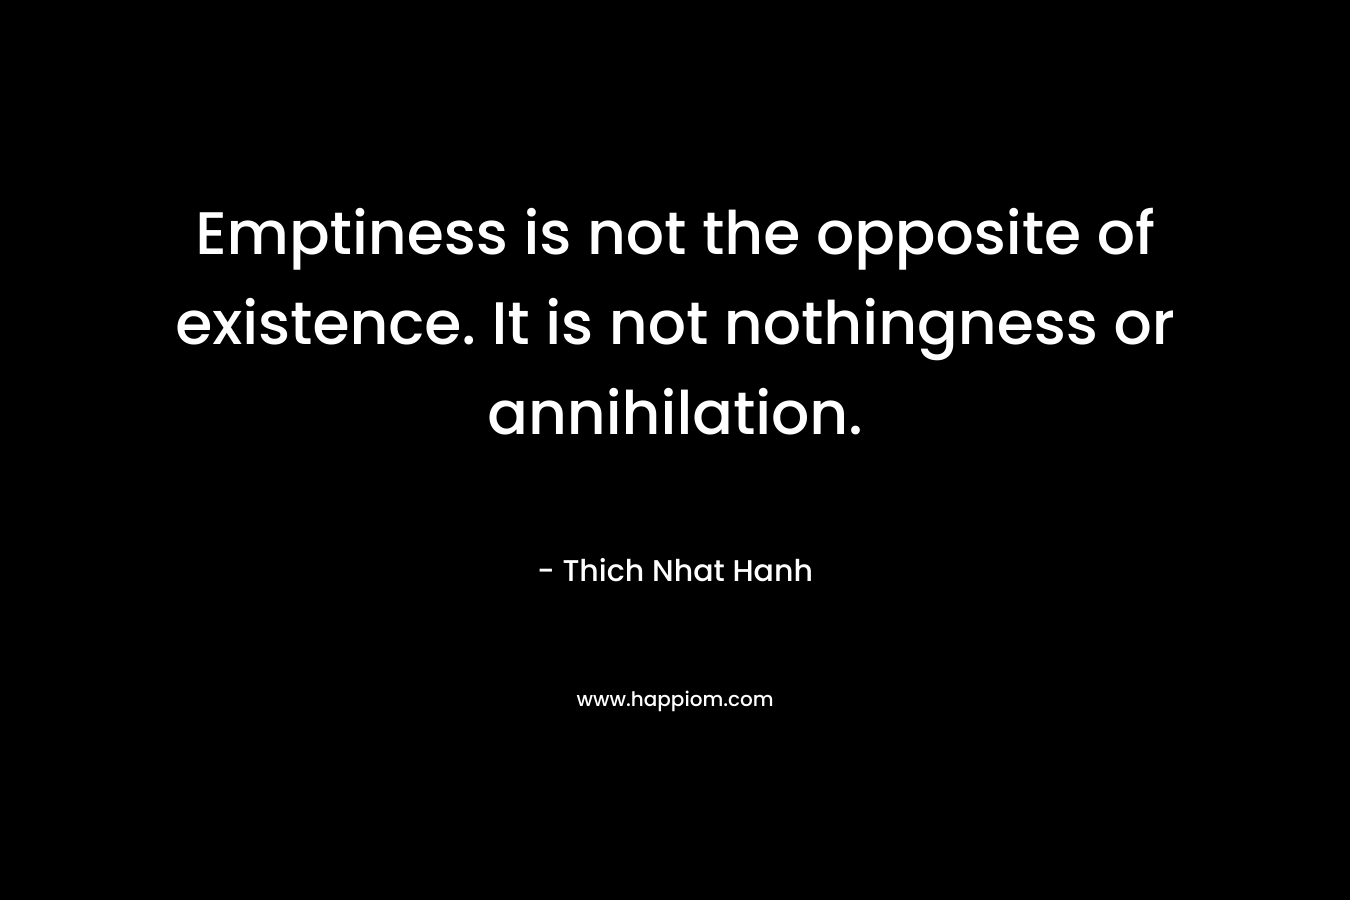 Emptiness is not the opposite of existence. It is not nothingness or annihilation. – Thich Nhat Hanh